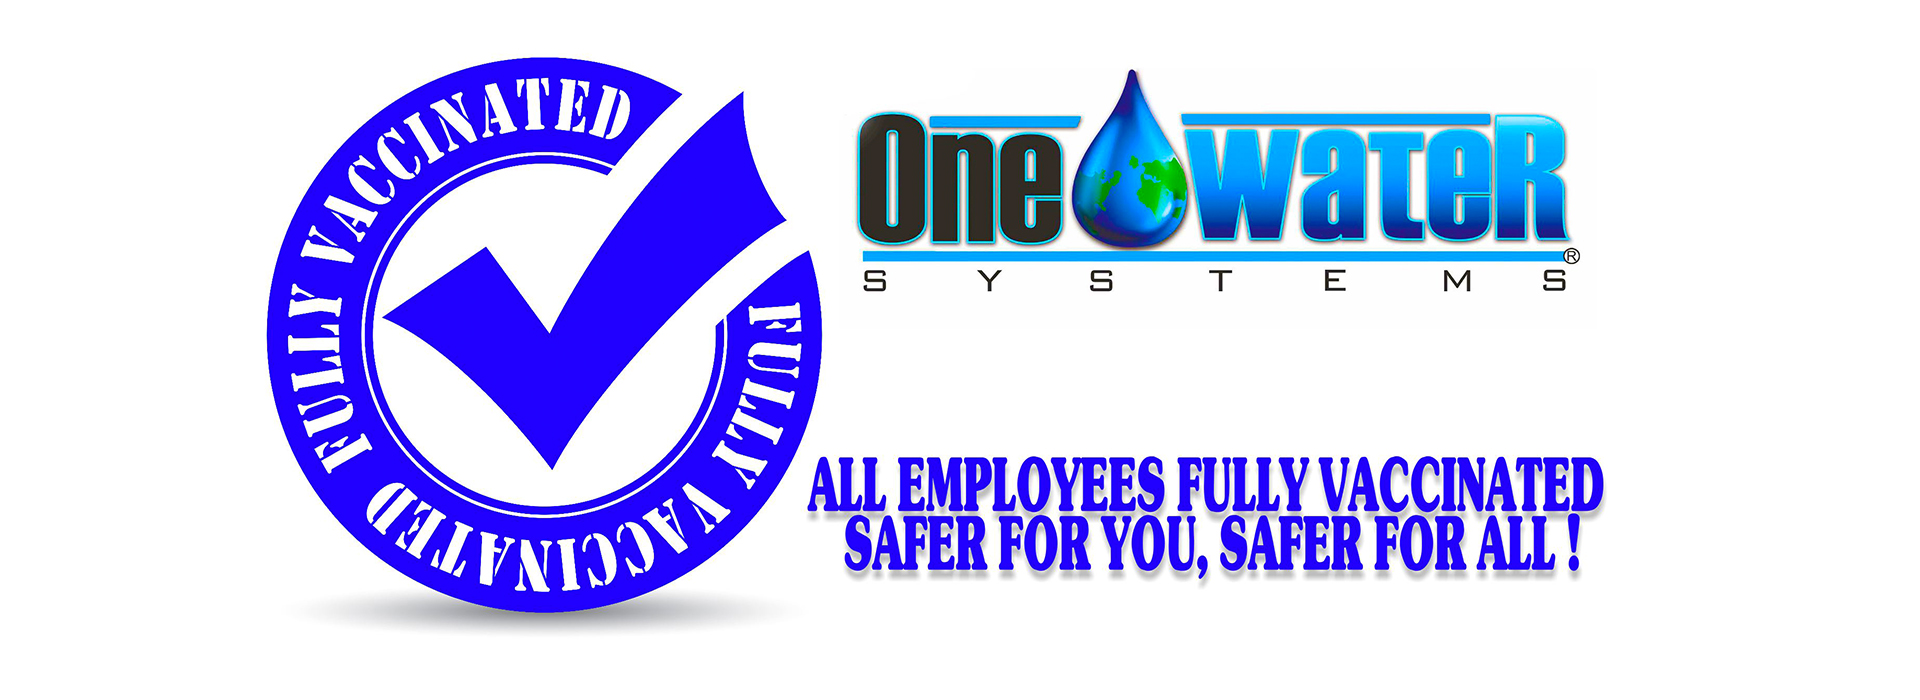 One Water Systems